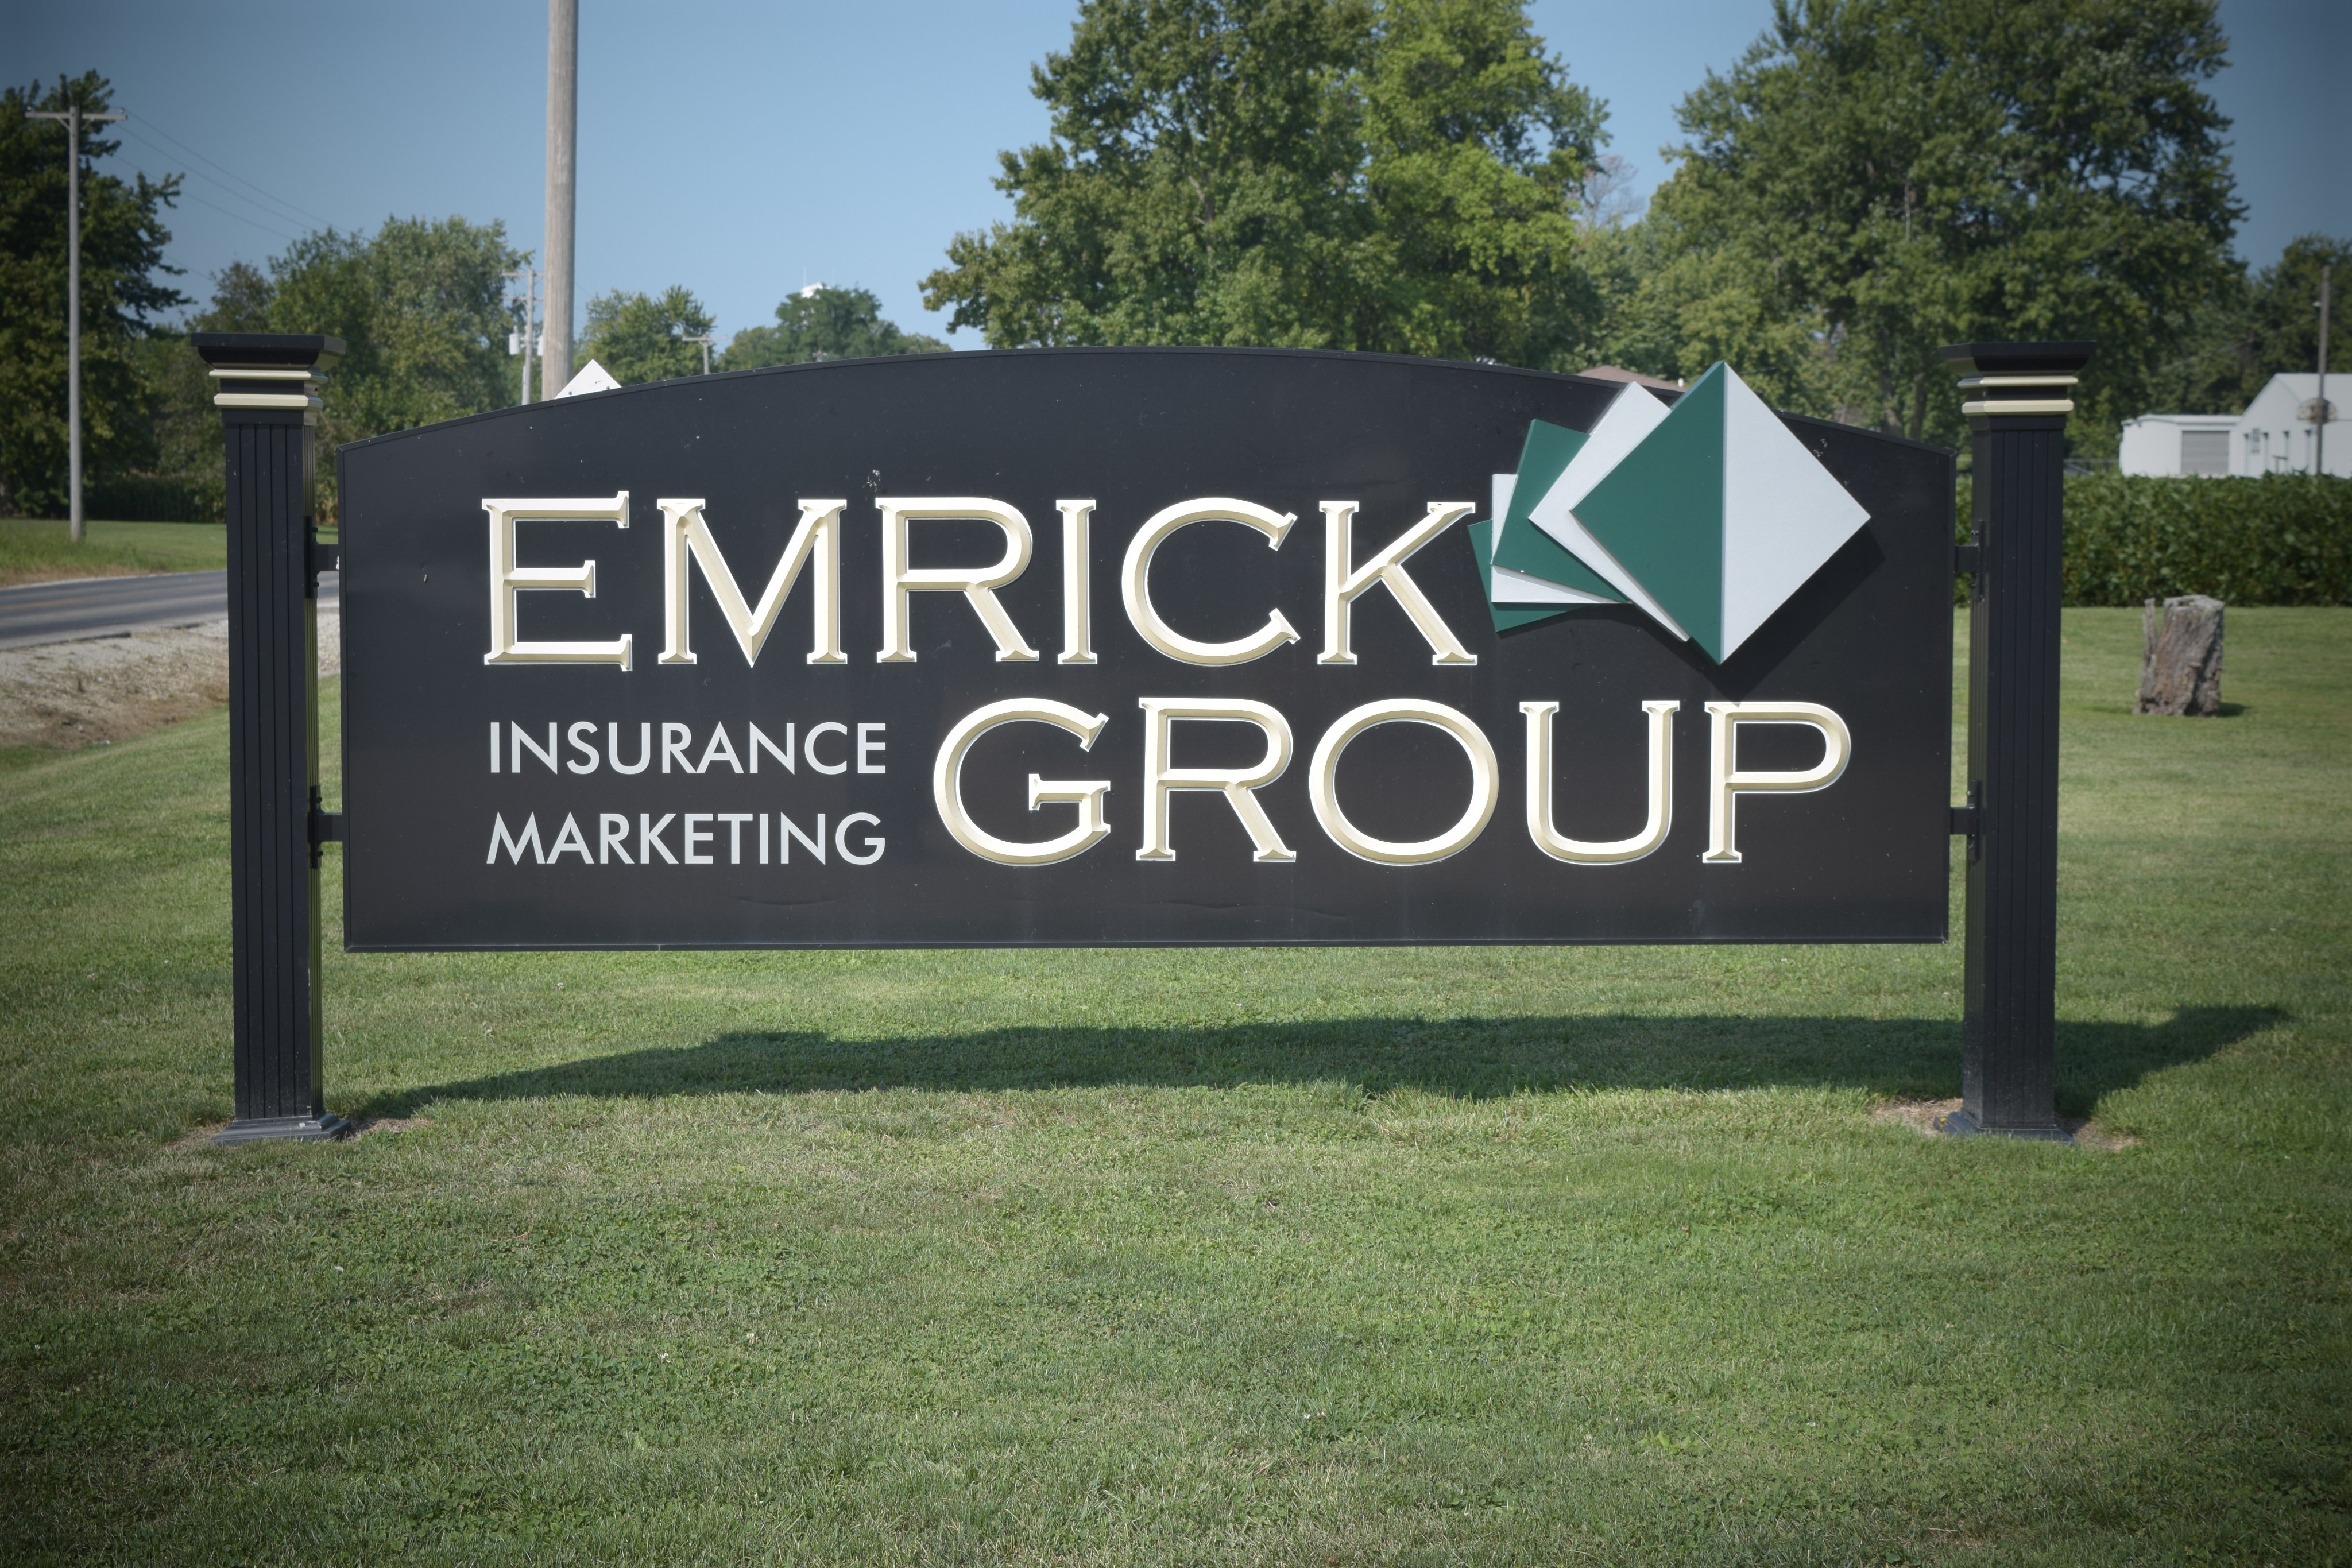 Emrick Insurance Marketing Group is here to support you.  When you work with us, you will receive immediate, personal service!